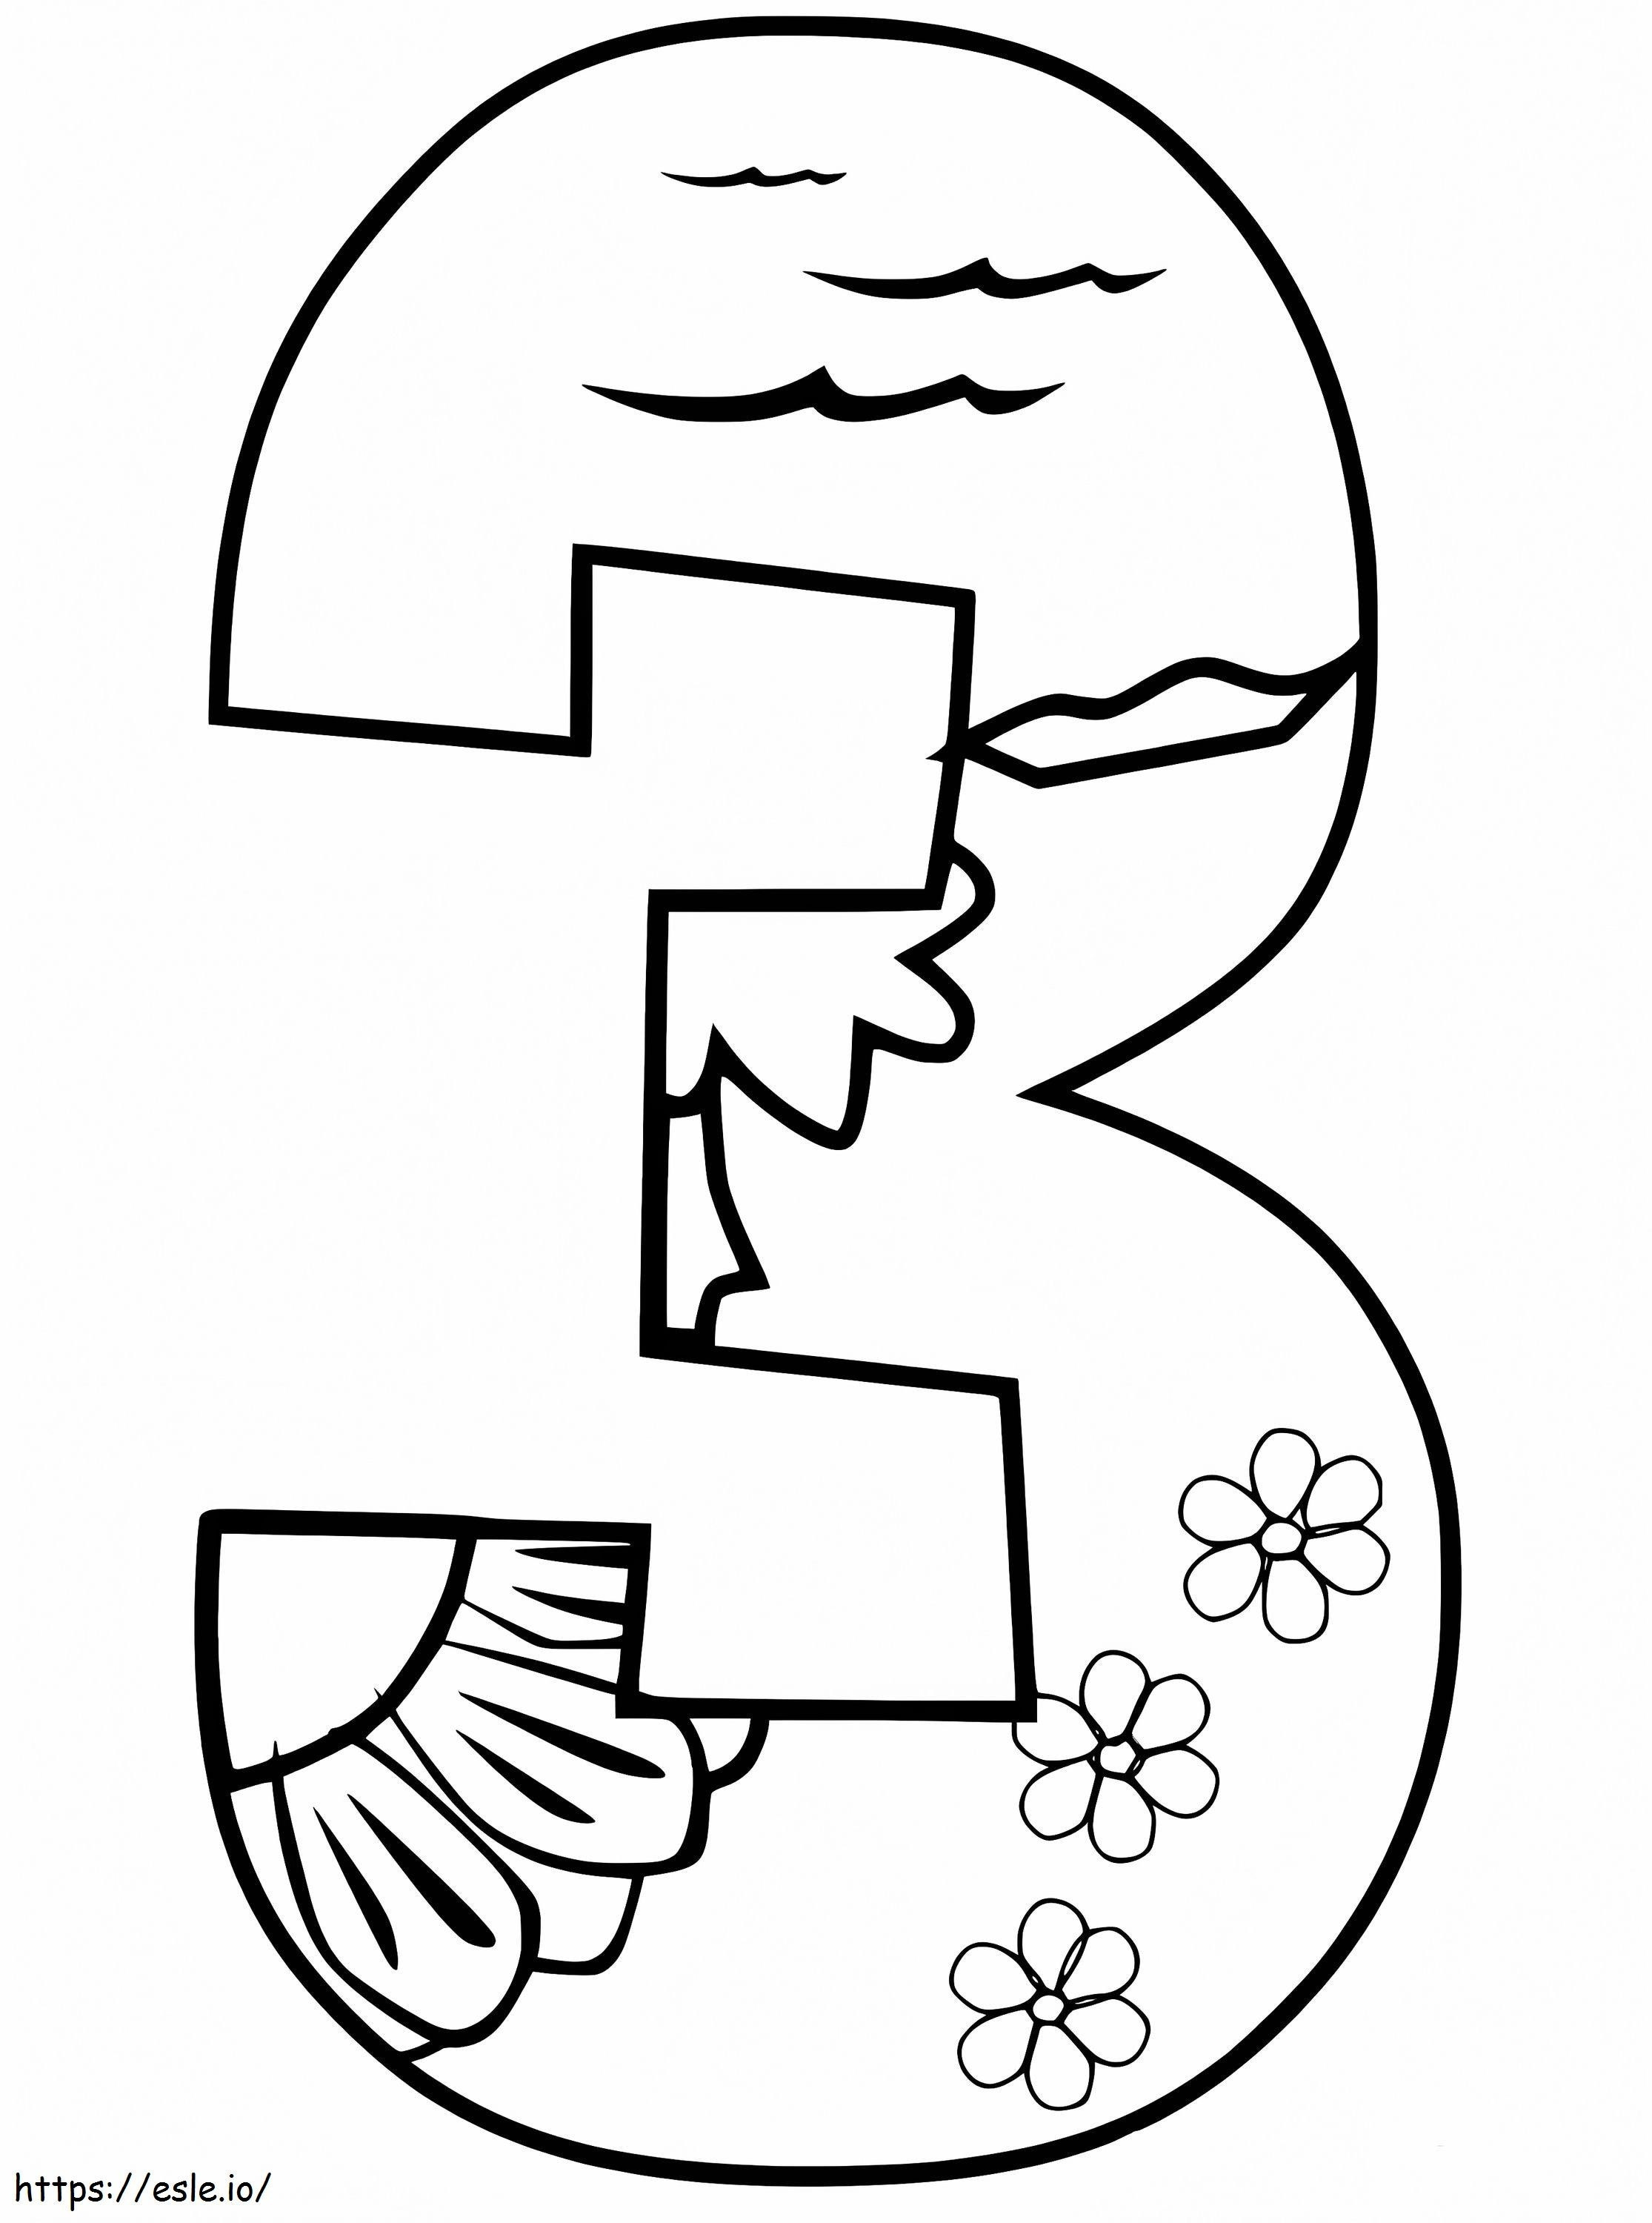 Number 3 Pattern coloring page